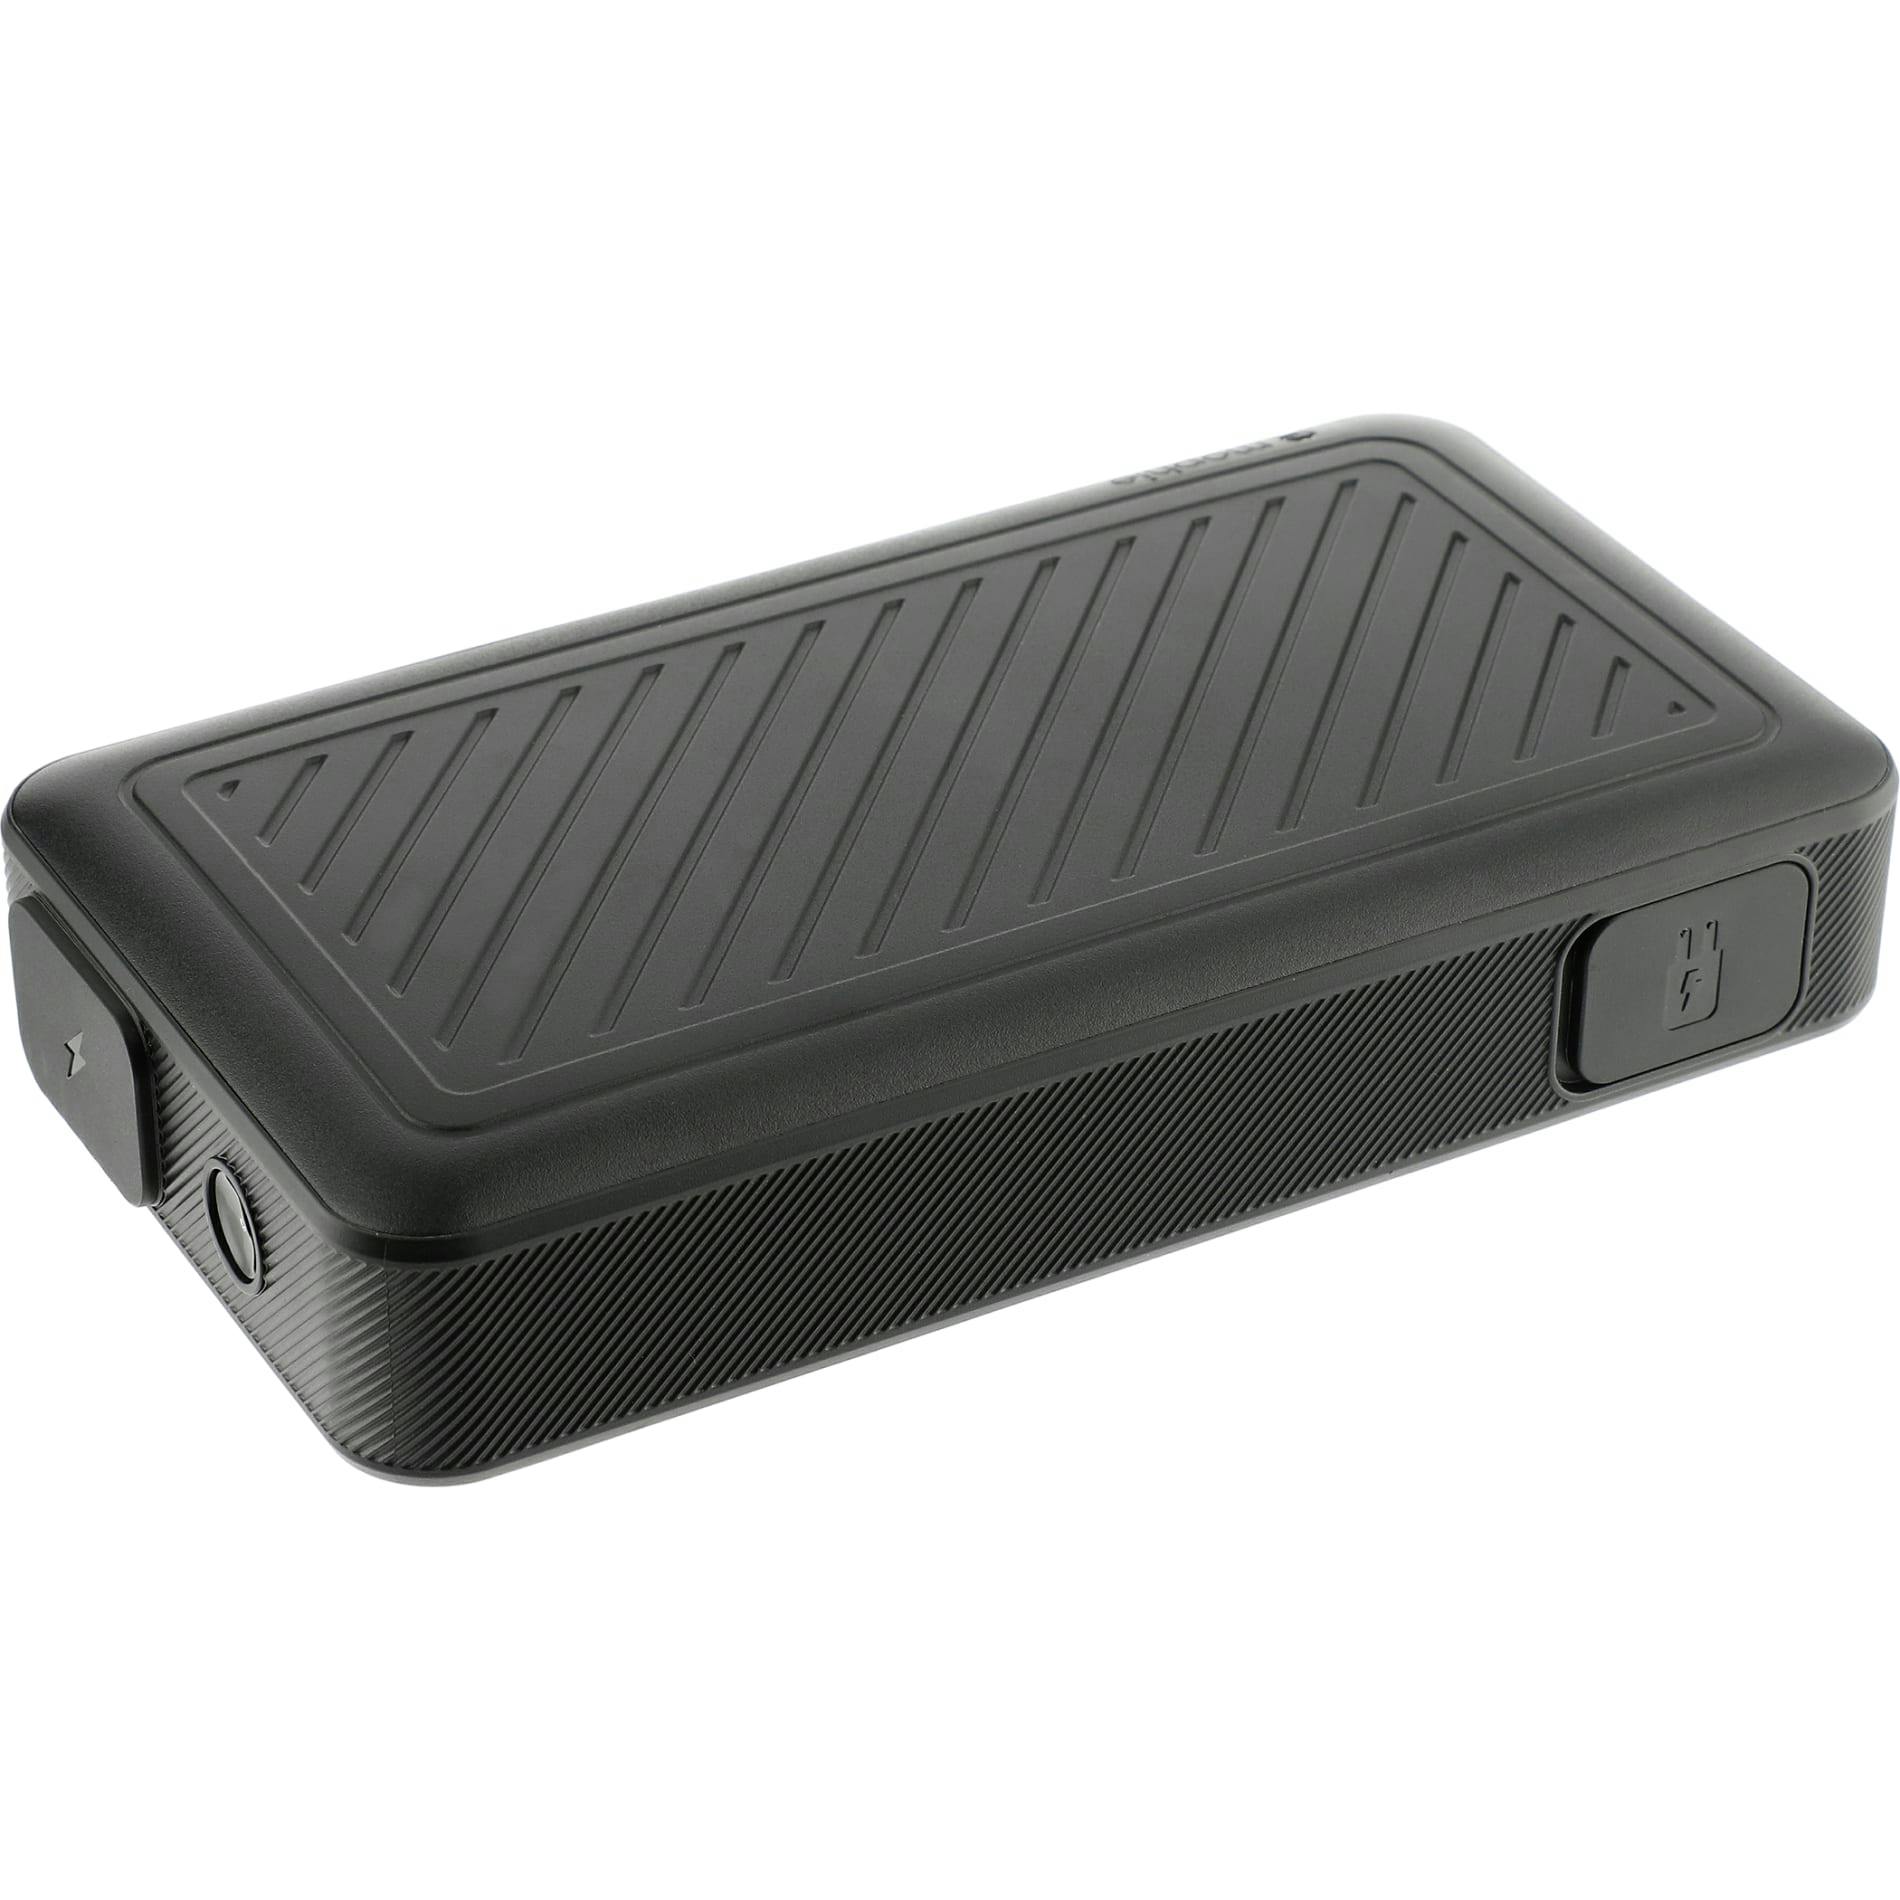 mophie® Powerstation Go Rugged AC - additional Image 5